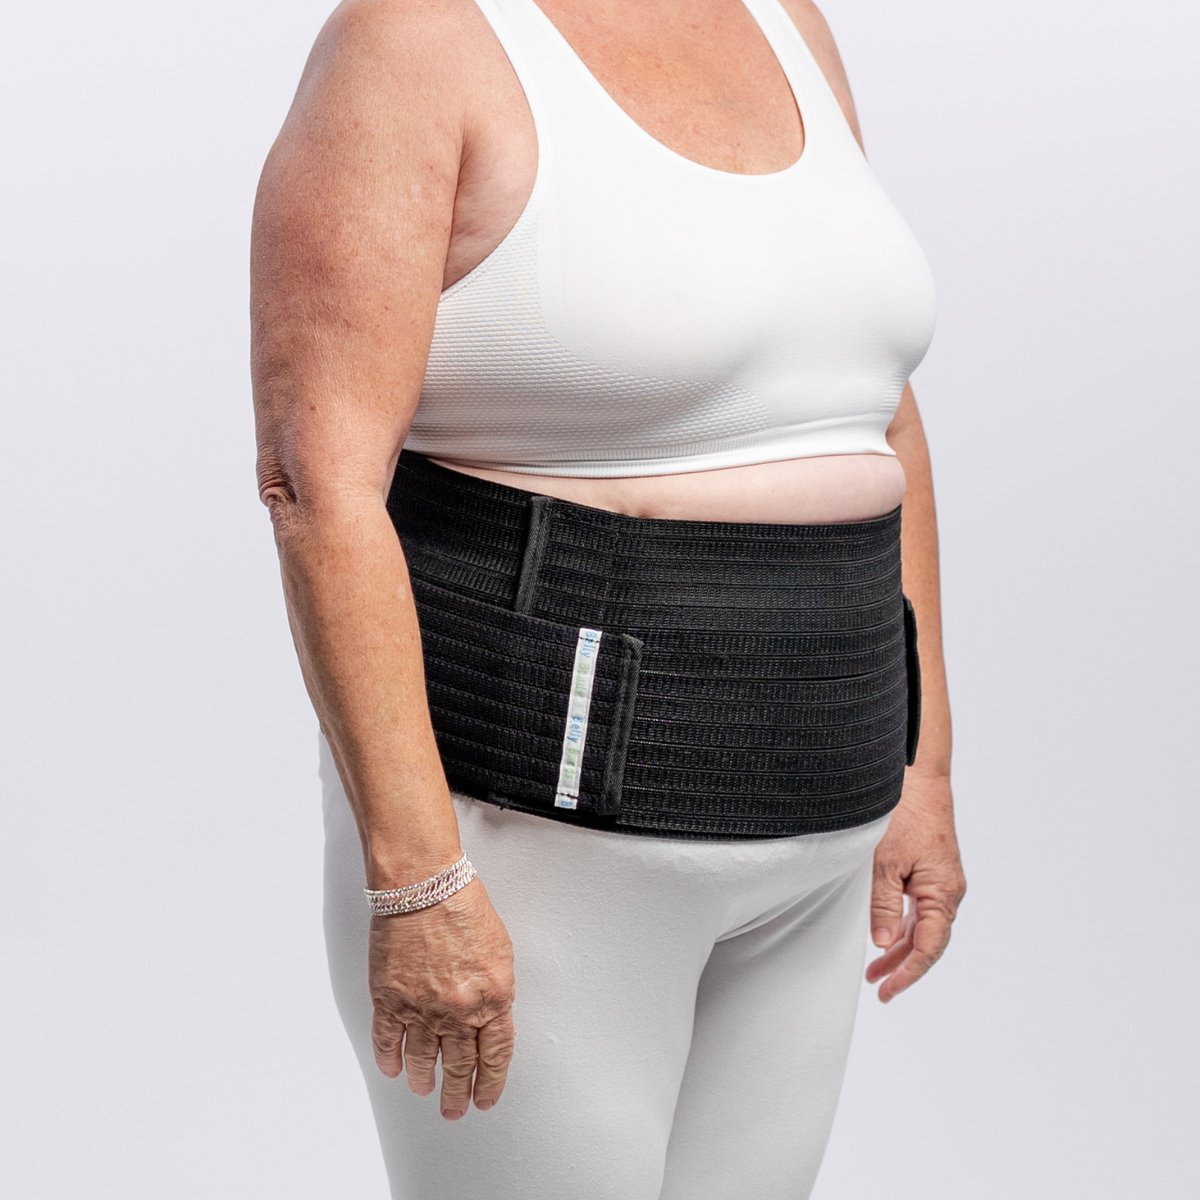 Hysterectomy Belly Support Band - Belly Bands